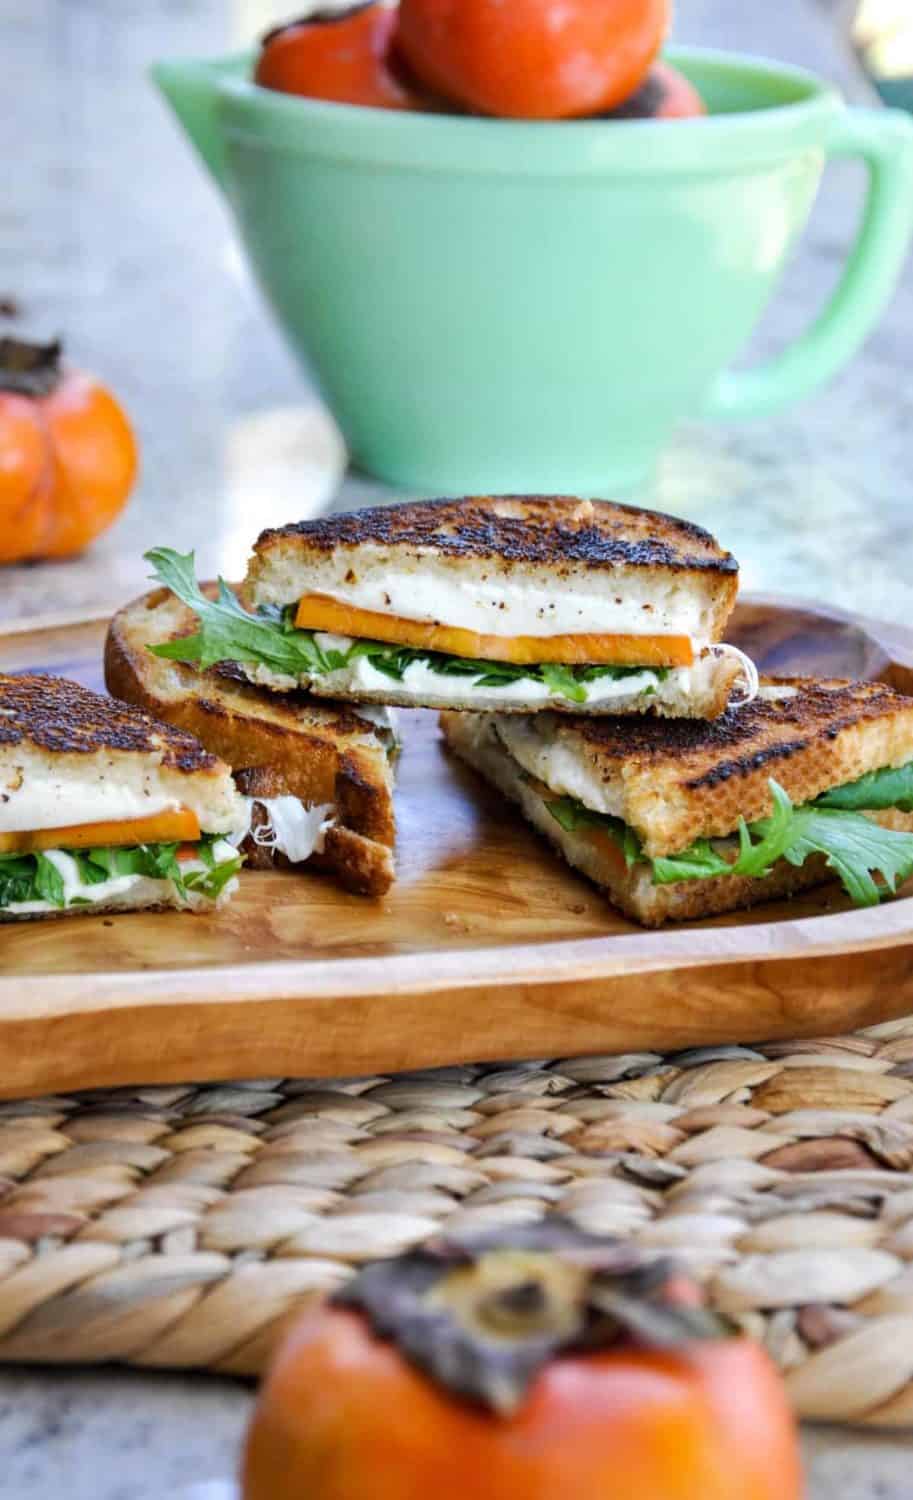 Persimmon Grilled Cheese